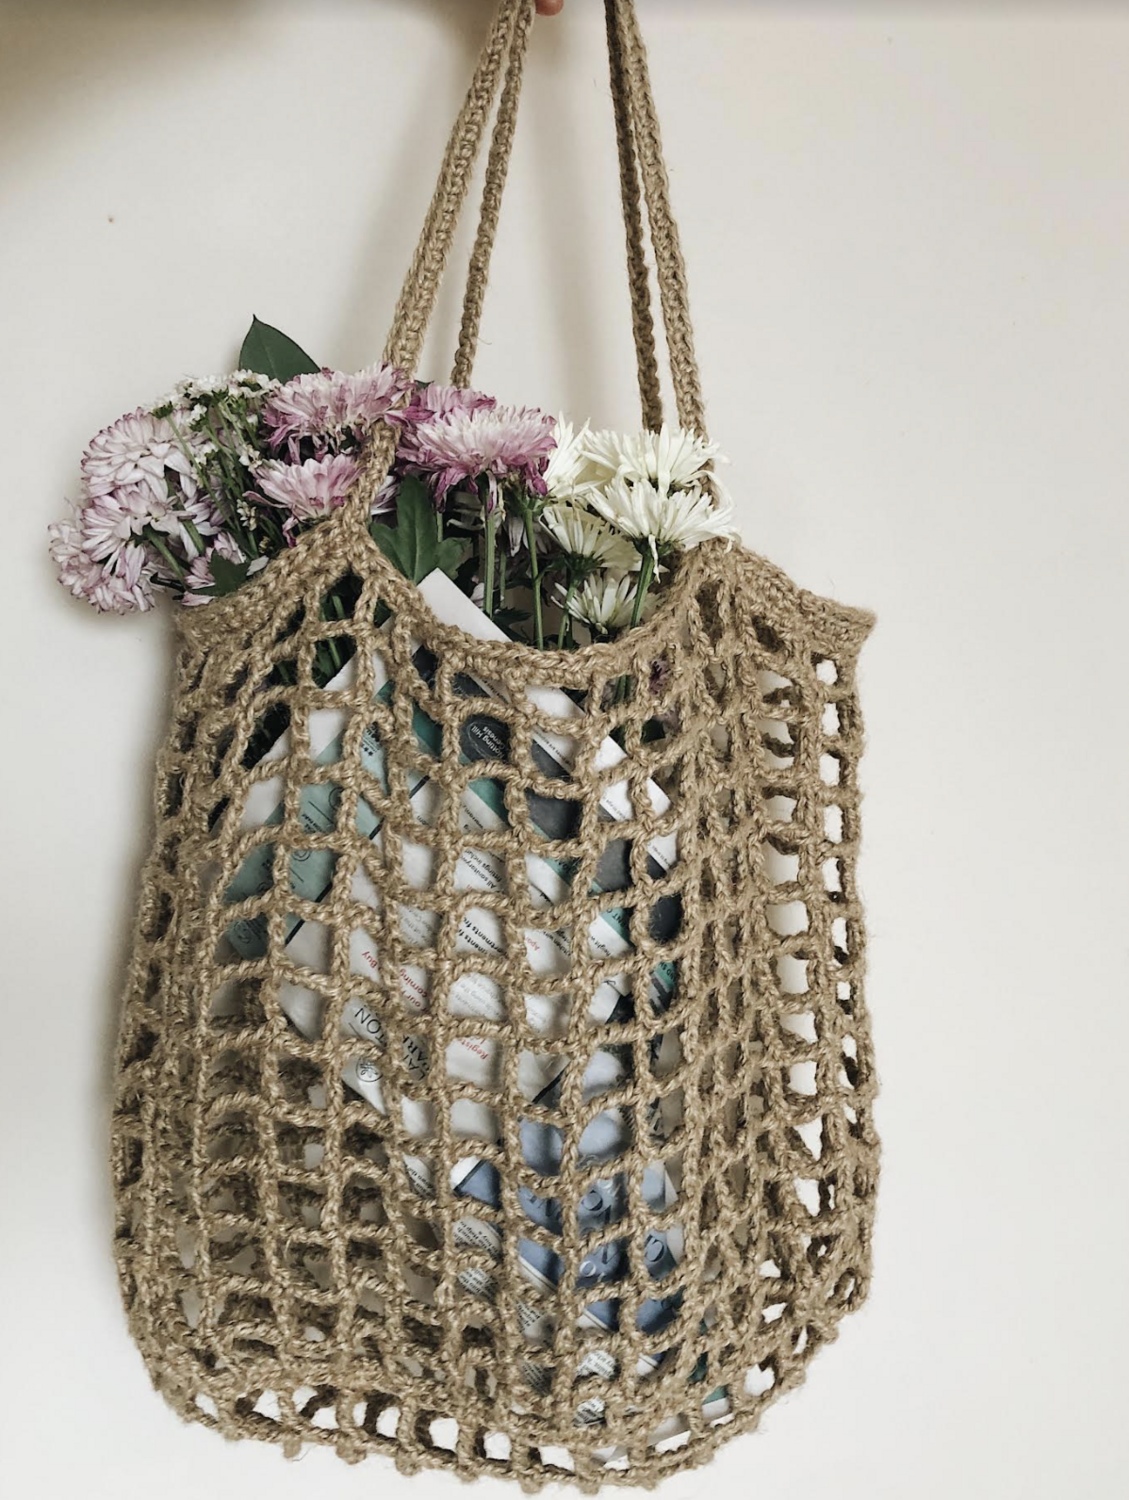 Jute Weaving Shoulder Bag (2-part)
Tuesday 21st &
Tuesday 28th February, 7-9pm